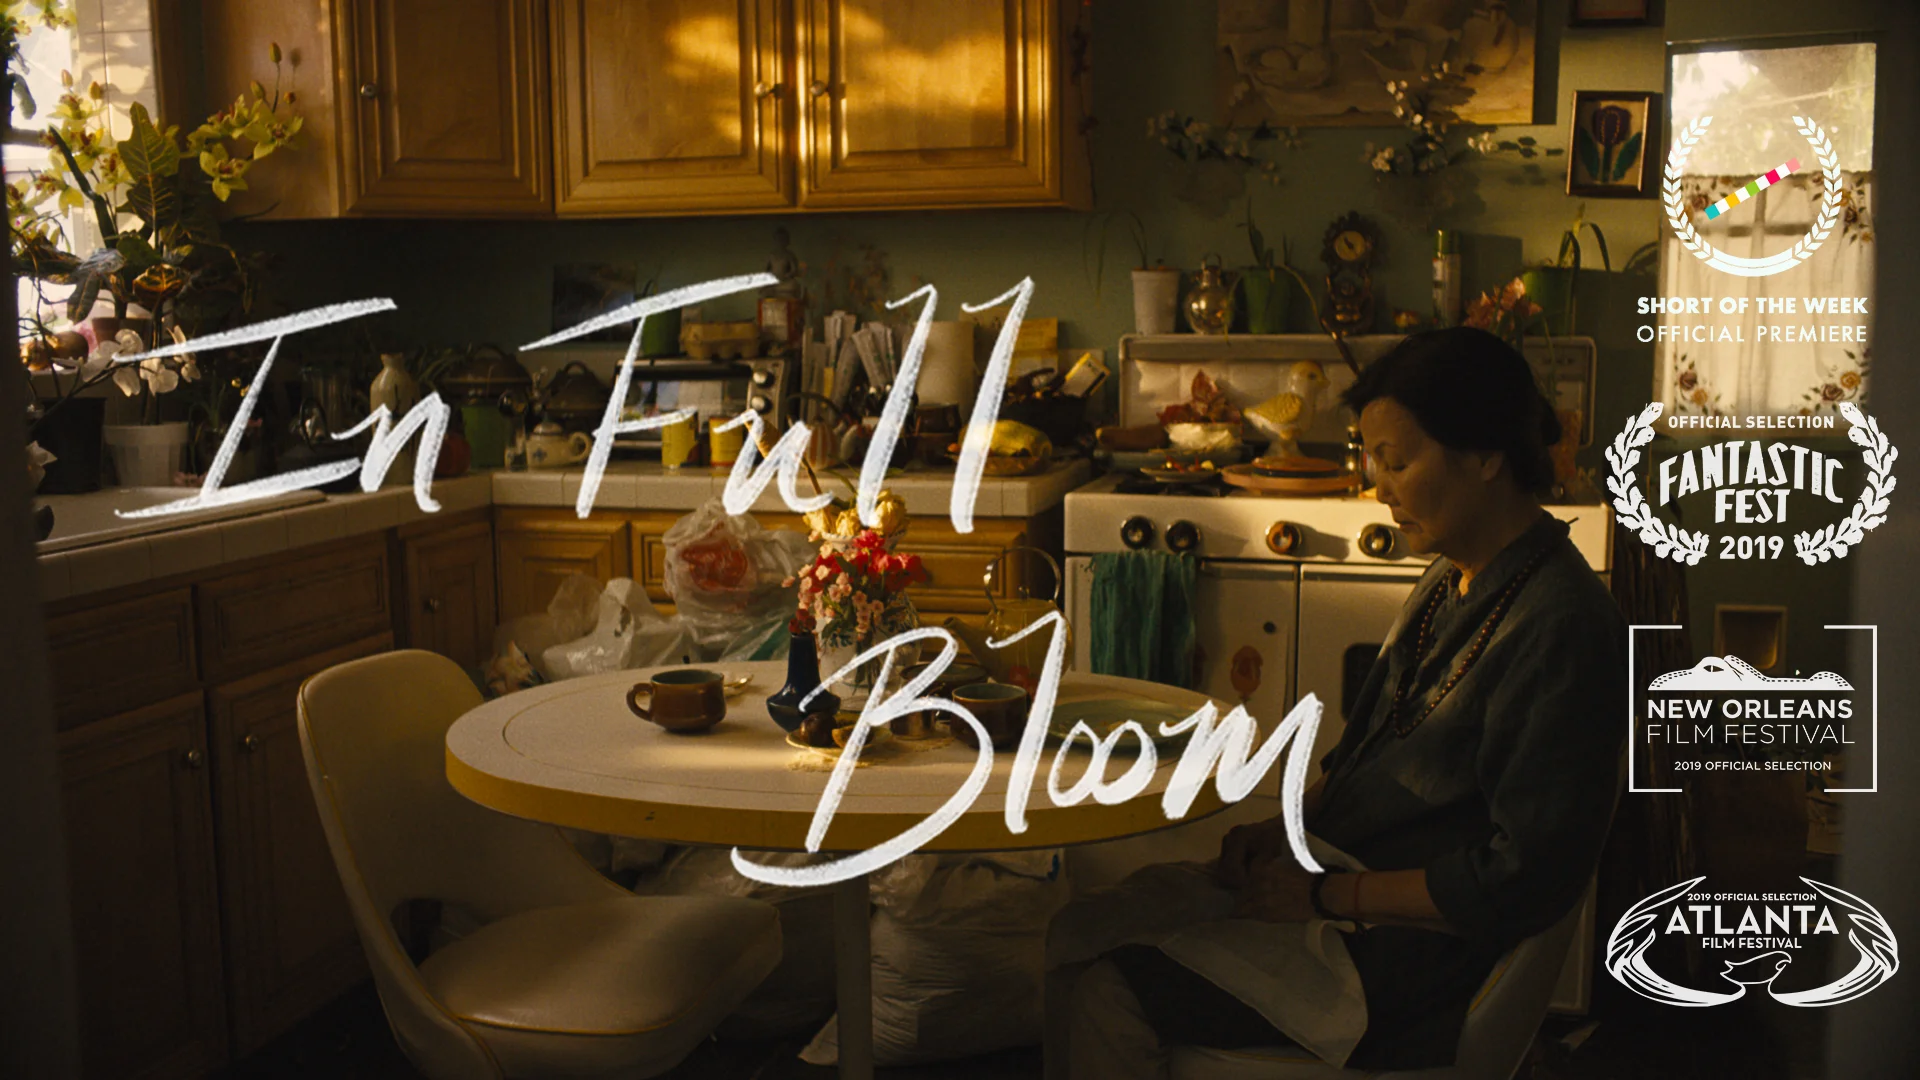 Full Bloom: Where to Watch and Stream Online